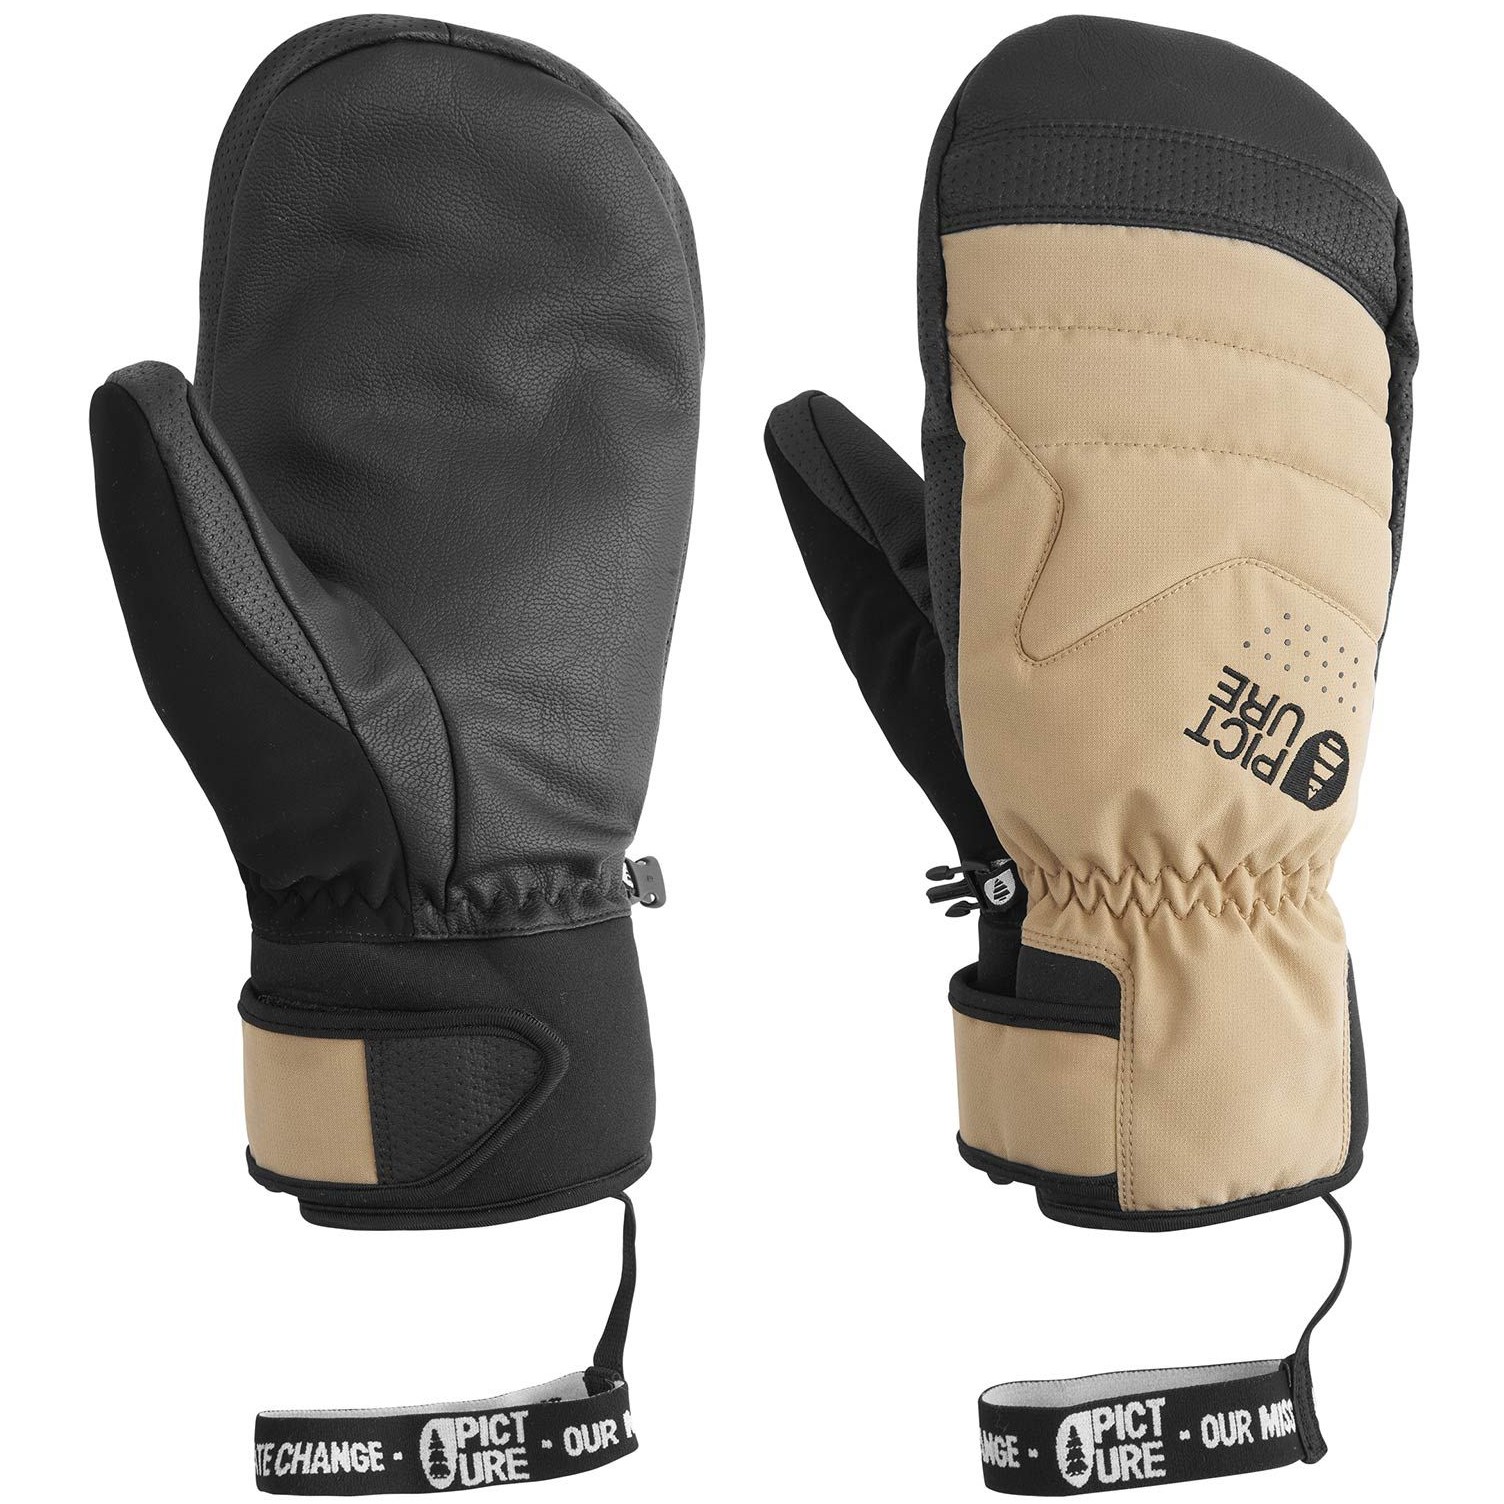 Picture Caldwell Snowboard/Ski Mitts